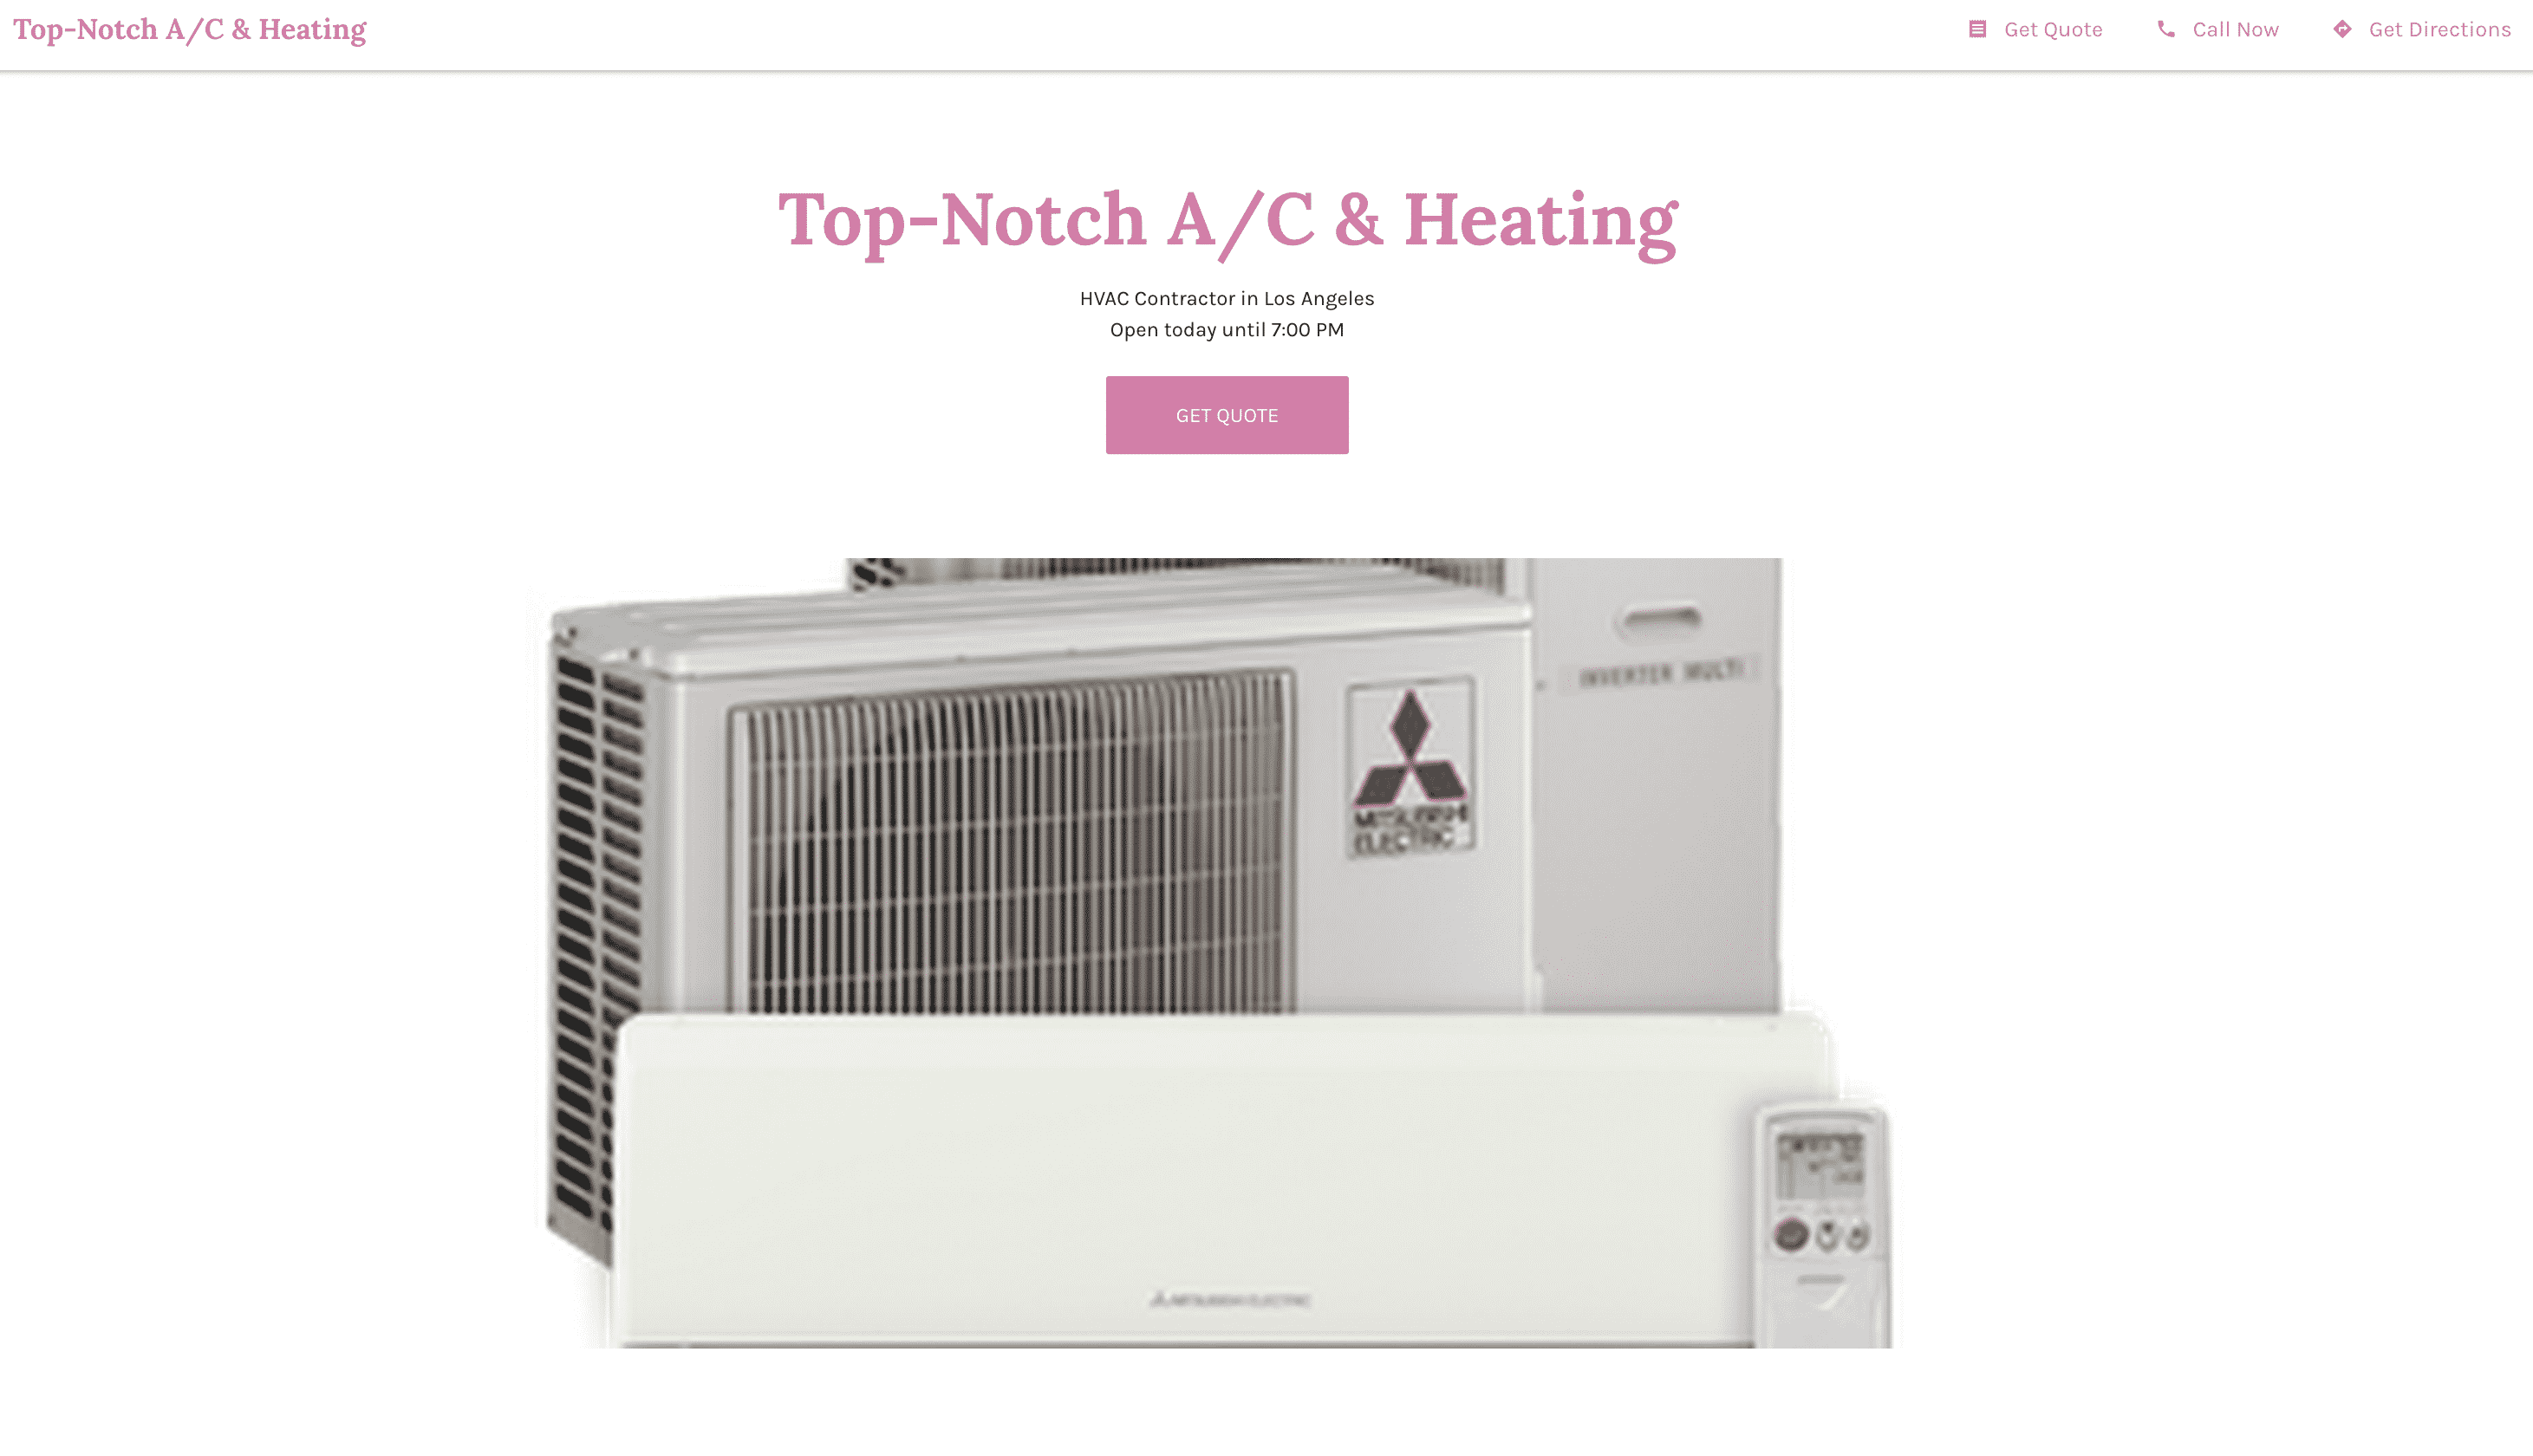 Top-Notch A/C & Heating Business Site